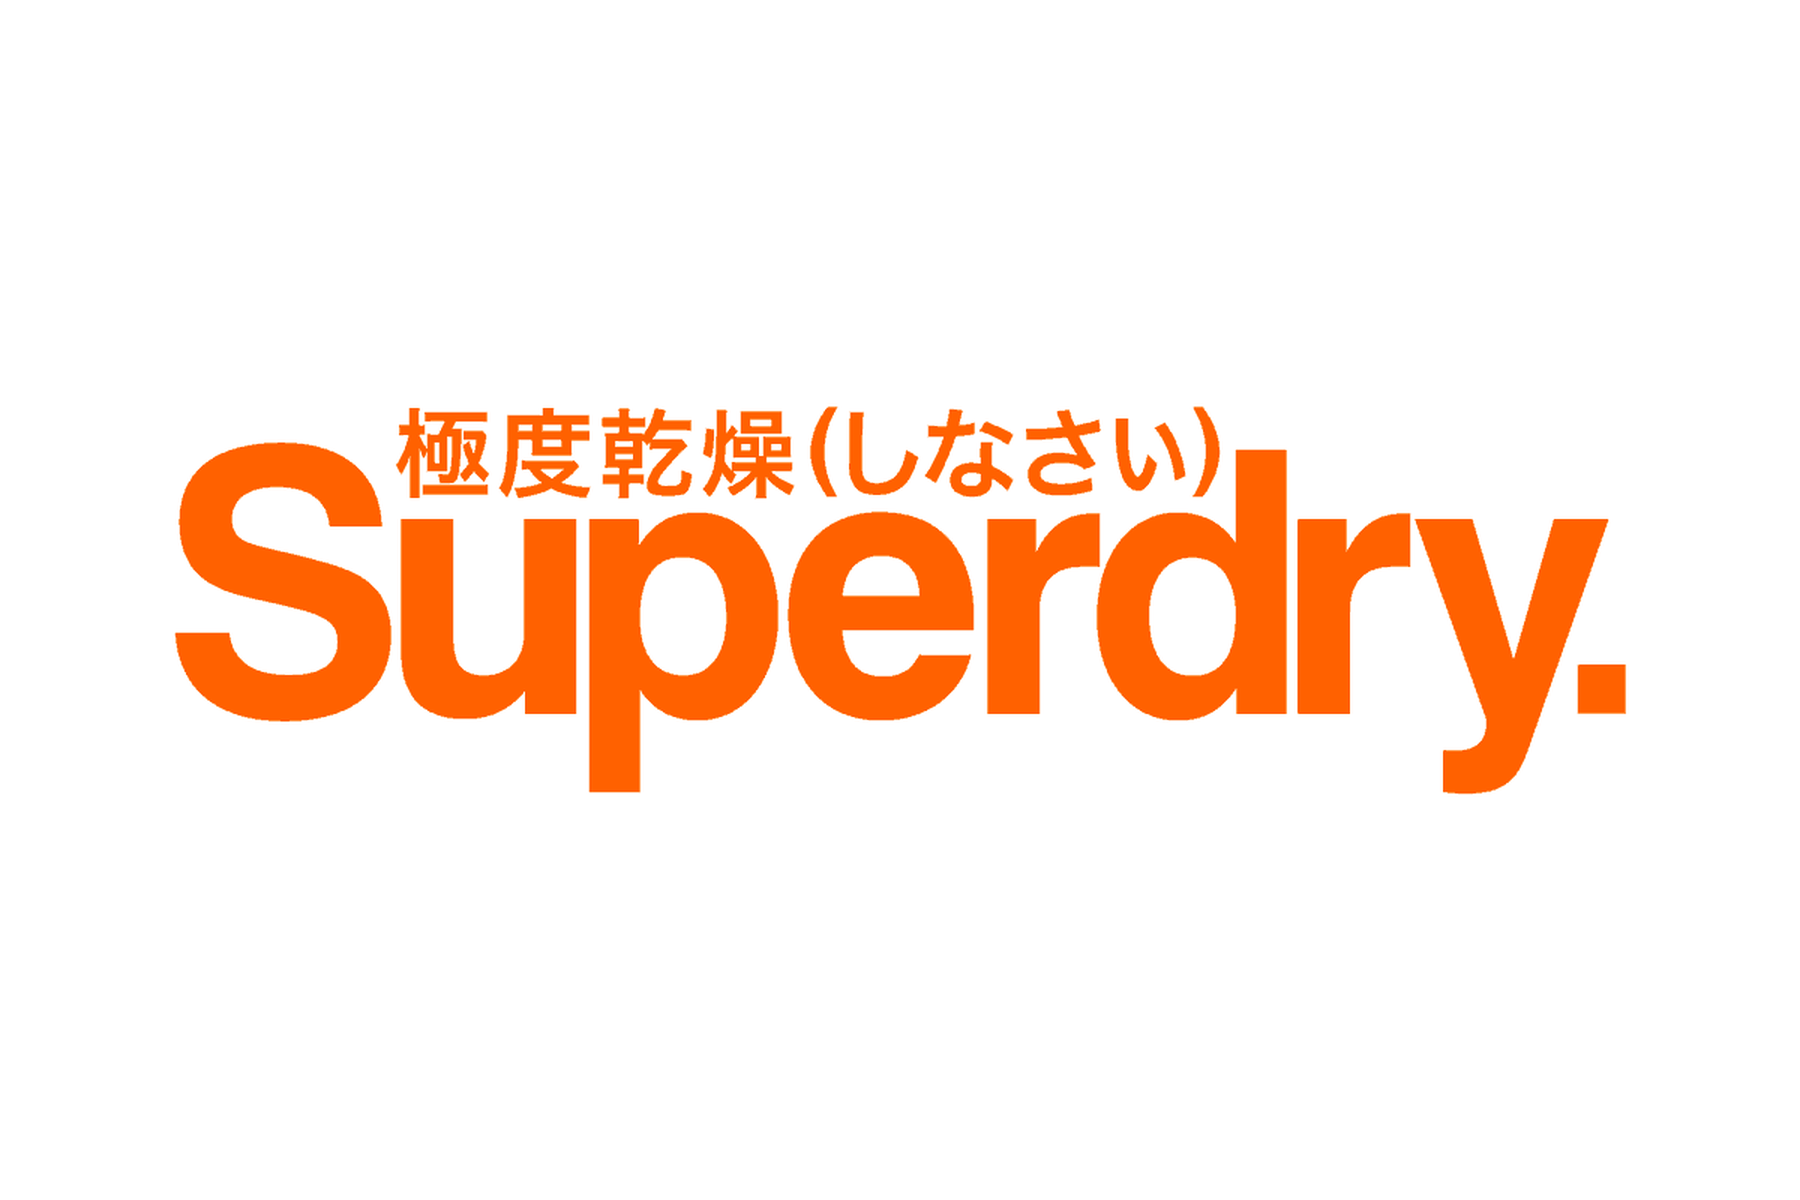 Superdry Coupon Code